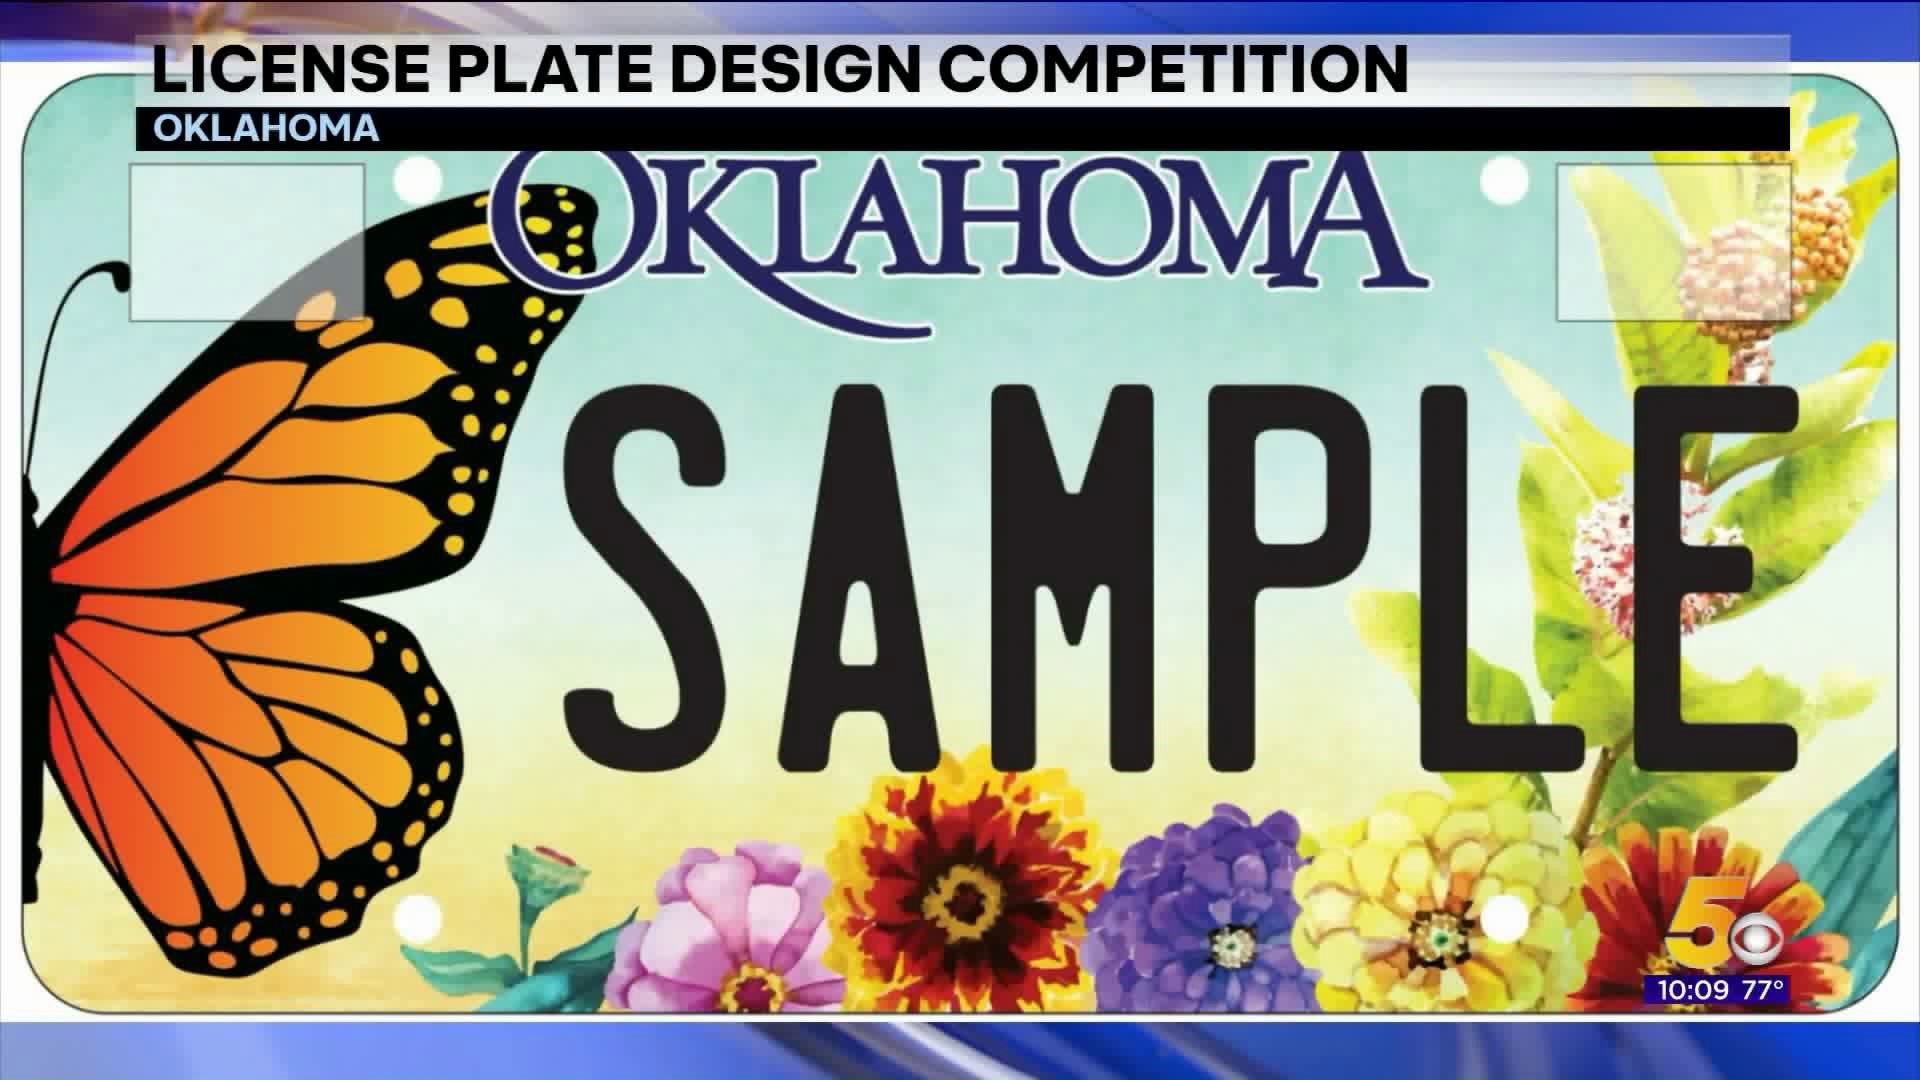 Oklahoma License Plate Design Competition Featuring Monarch Butterflies Open For Voting